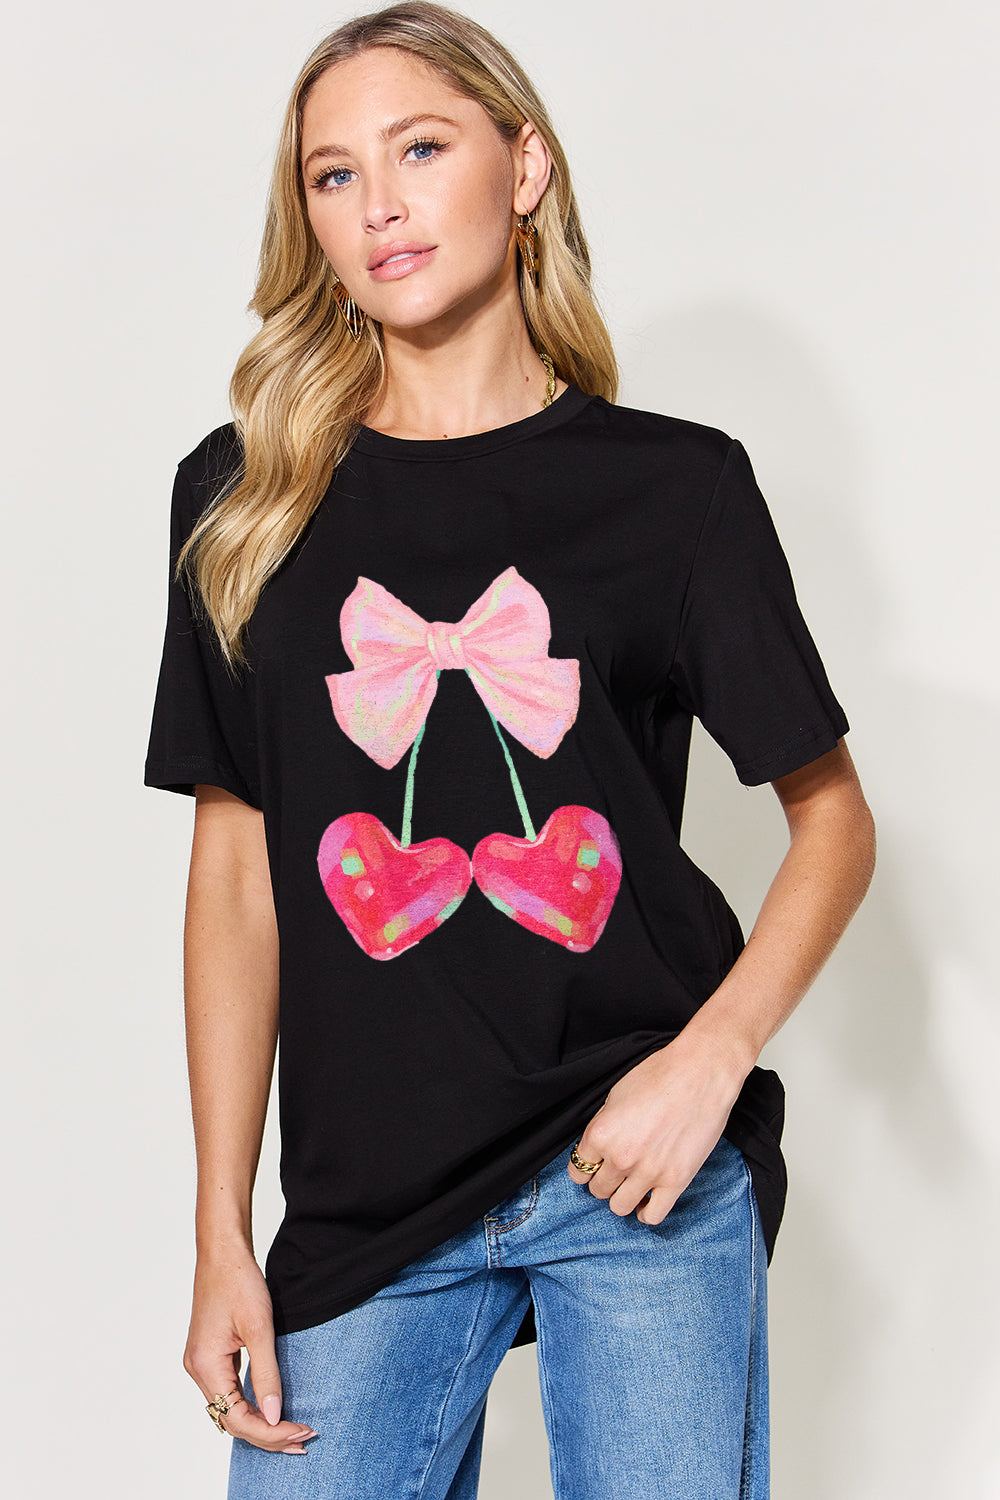 Simply Love Full Size Hearts and Bows Short Sleeve T-Shirt